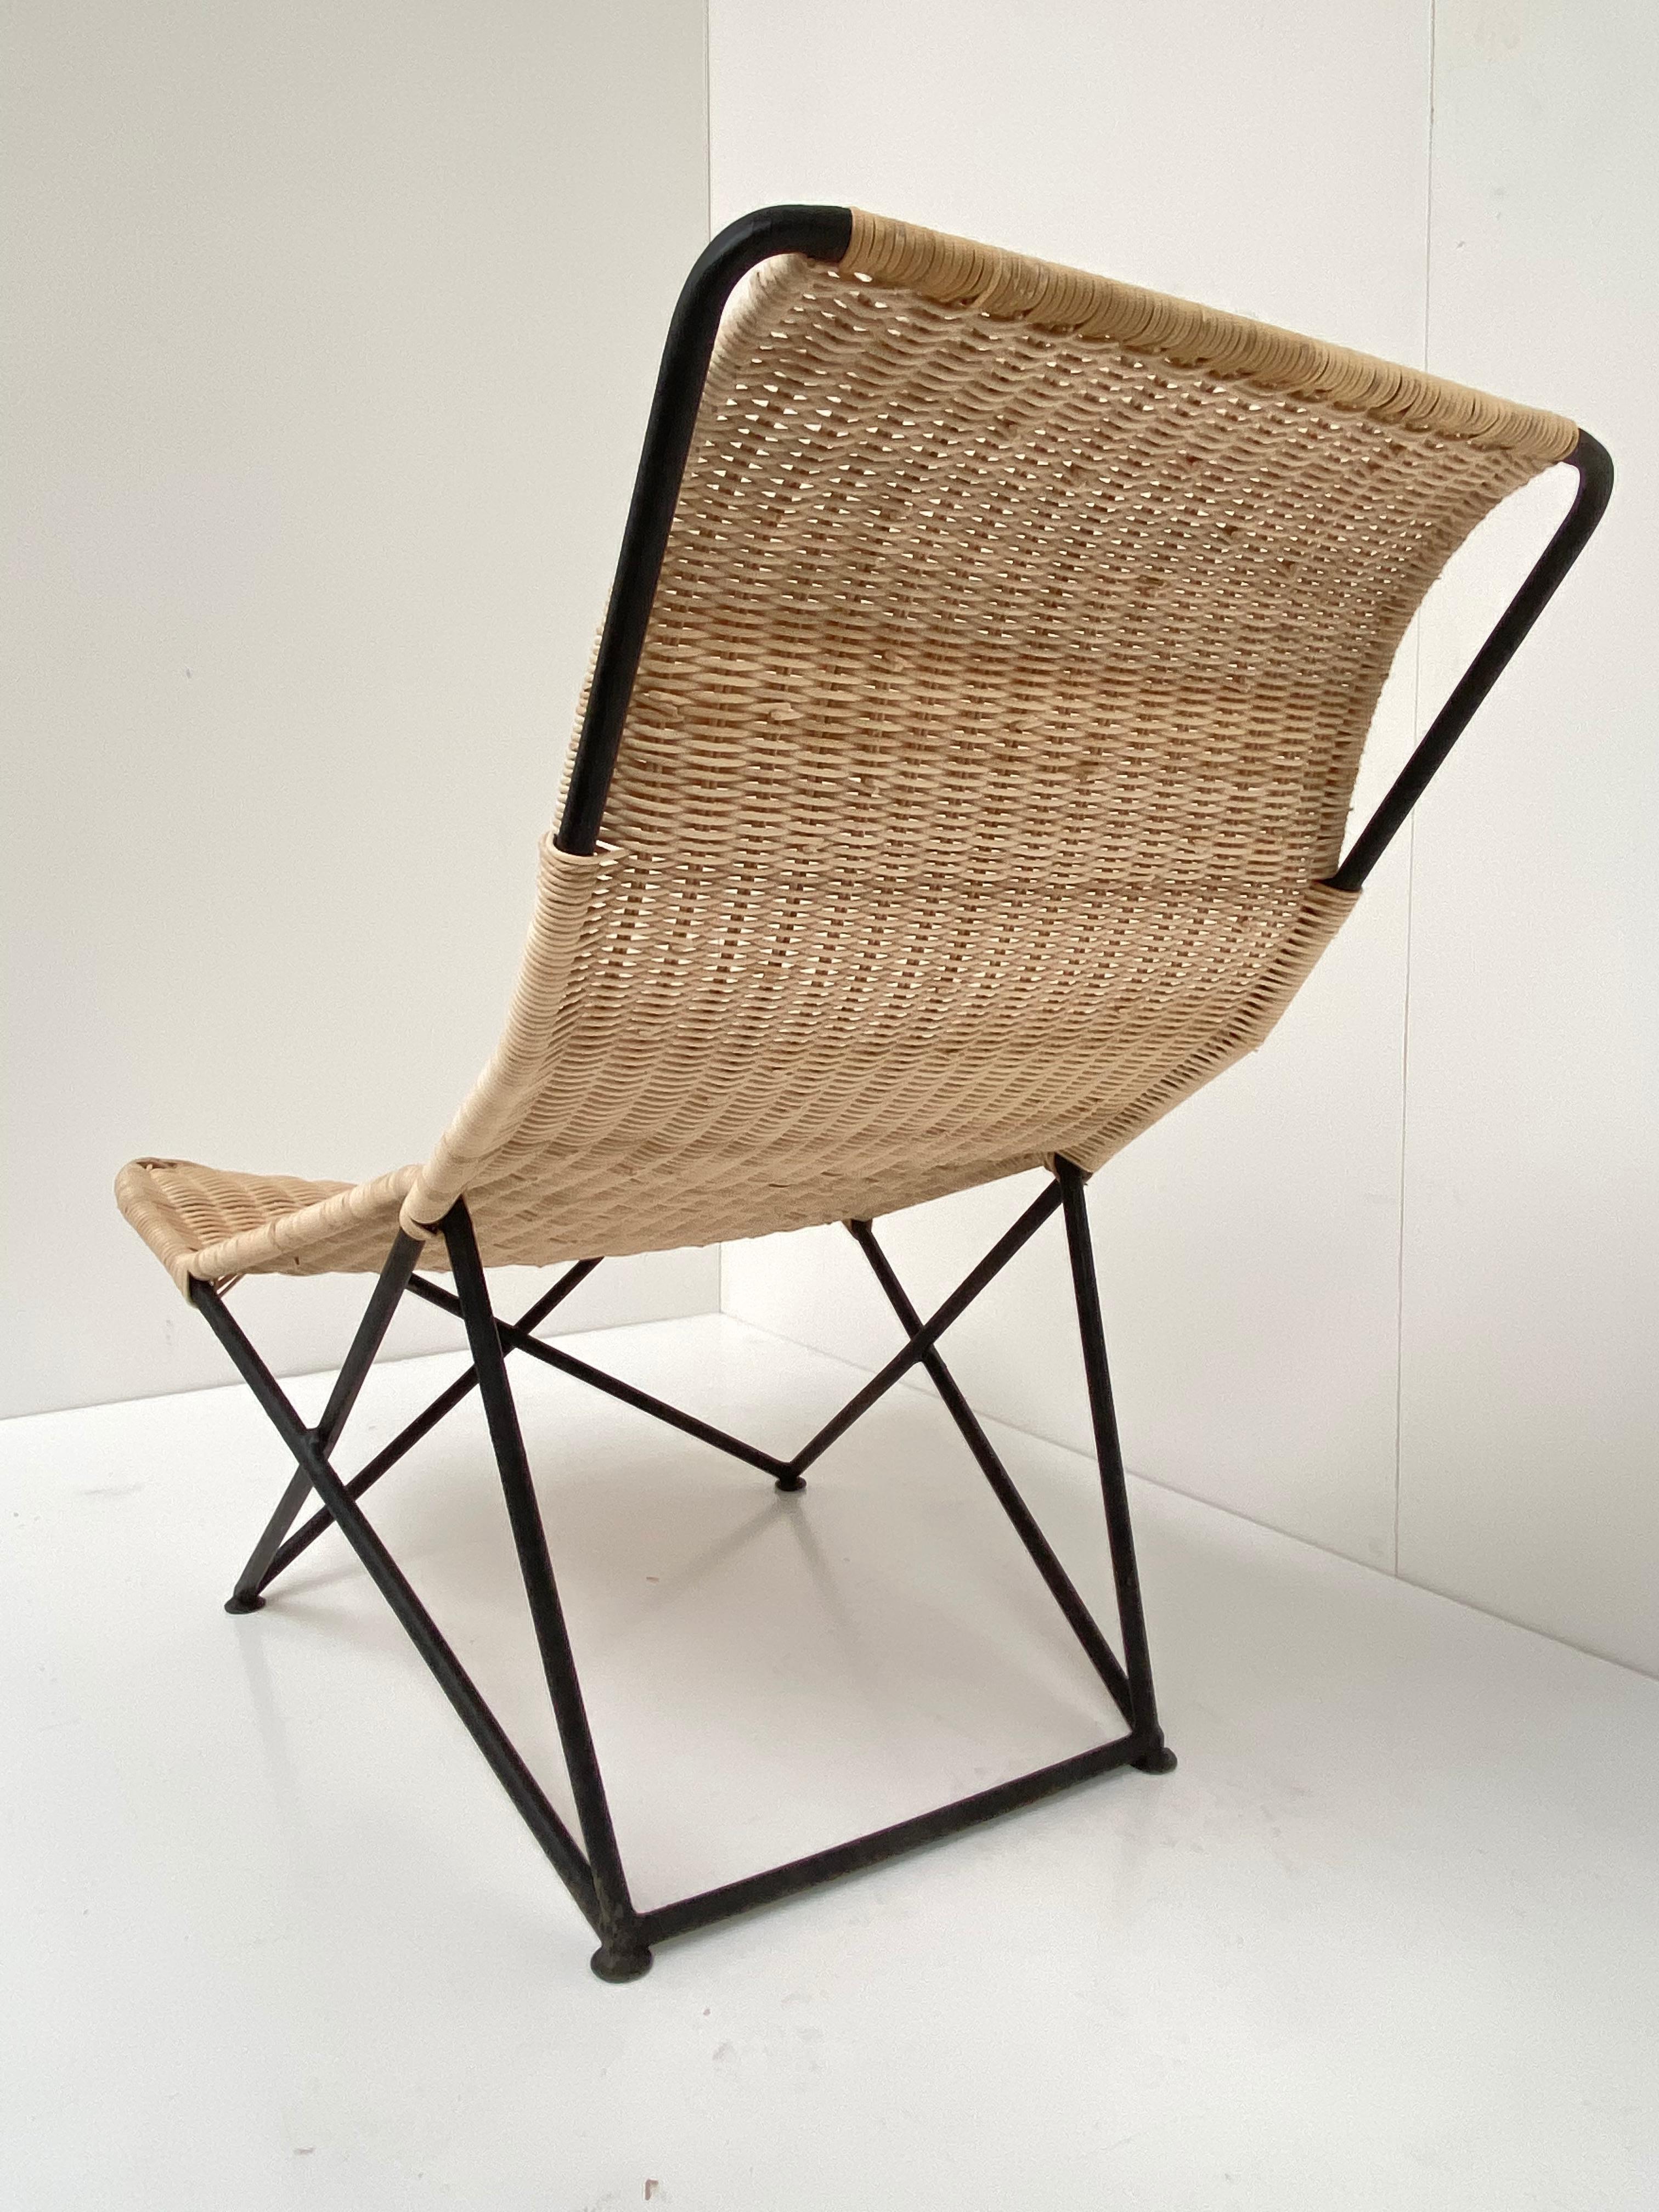 Stunning Sculptural Form Wicker Chaise Attributed to Raoul Guys, France, 1950's For Sale 2